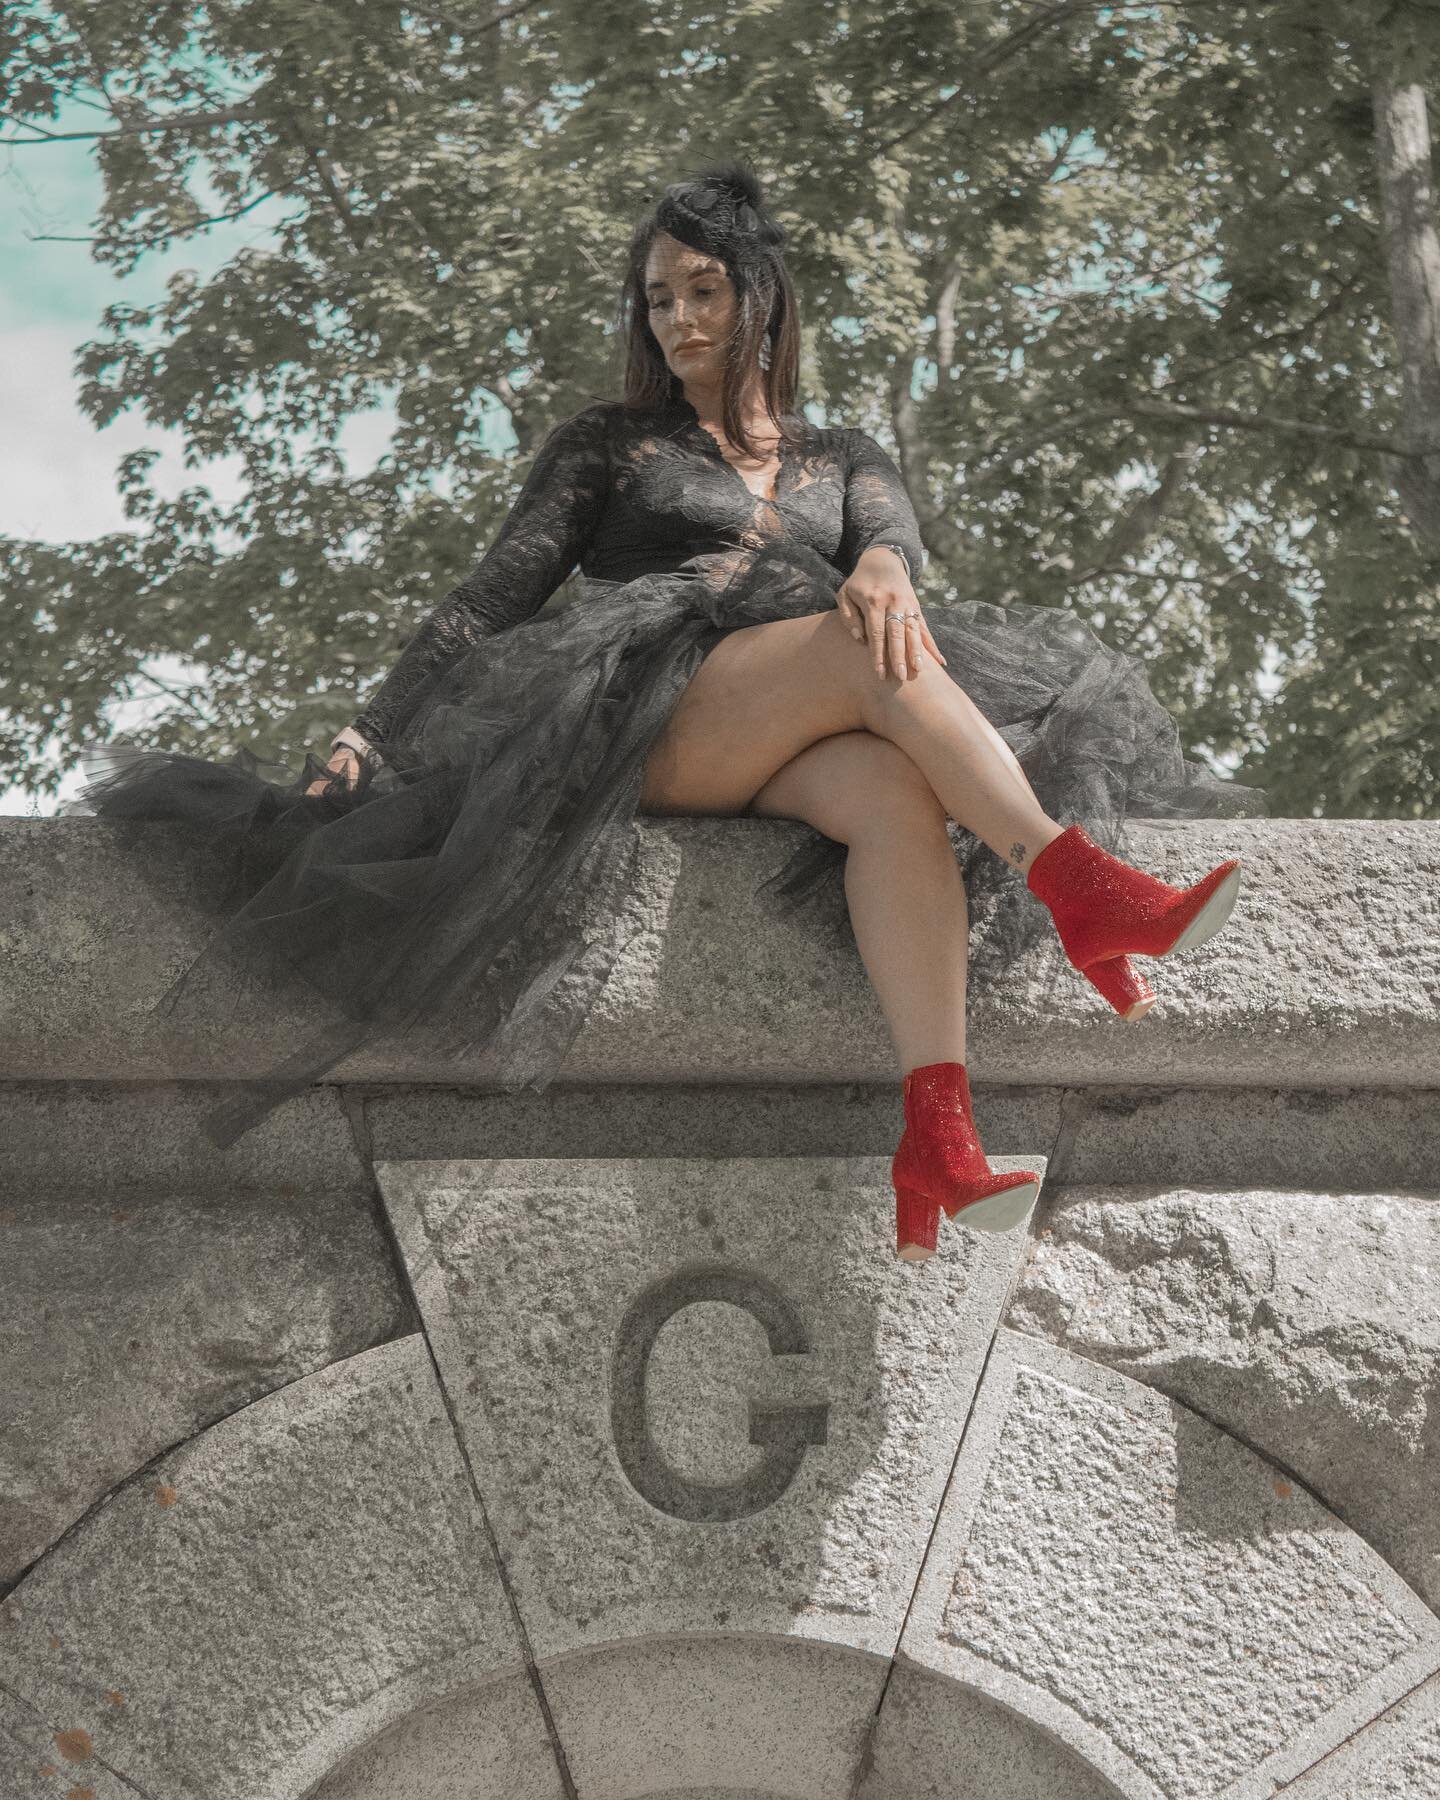 What better way to celebrate you birthday than to lay your youth to rest? 🍷💀
.
.
.
.
#deathtomy30s #birthdayshoot #birthdayphotoshoots #deathtomyyouth #cemetery #cemetaryphotography #cemeteryphotoshoot